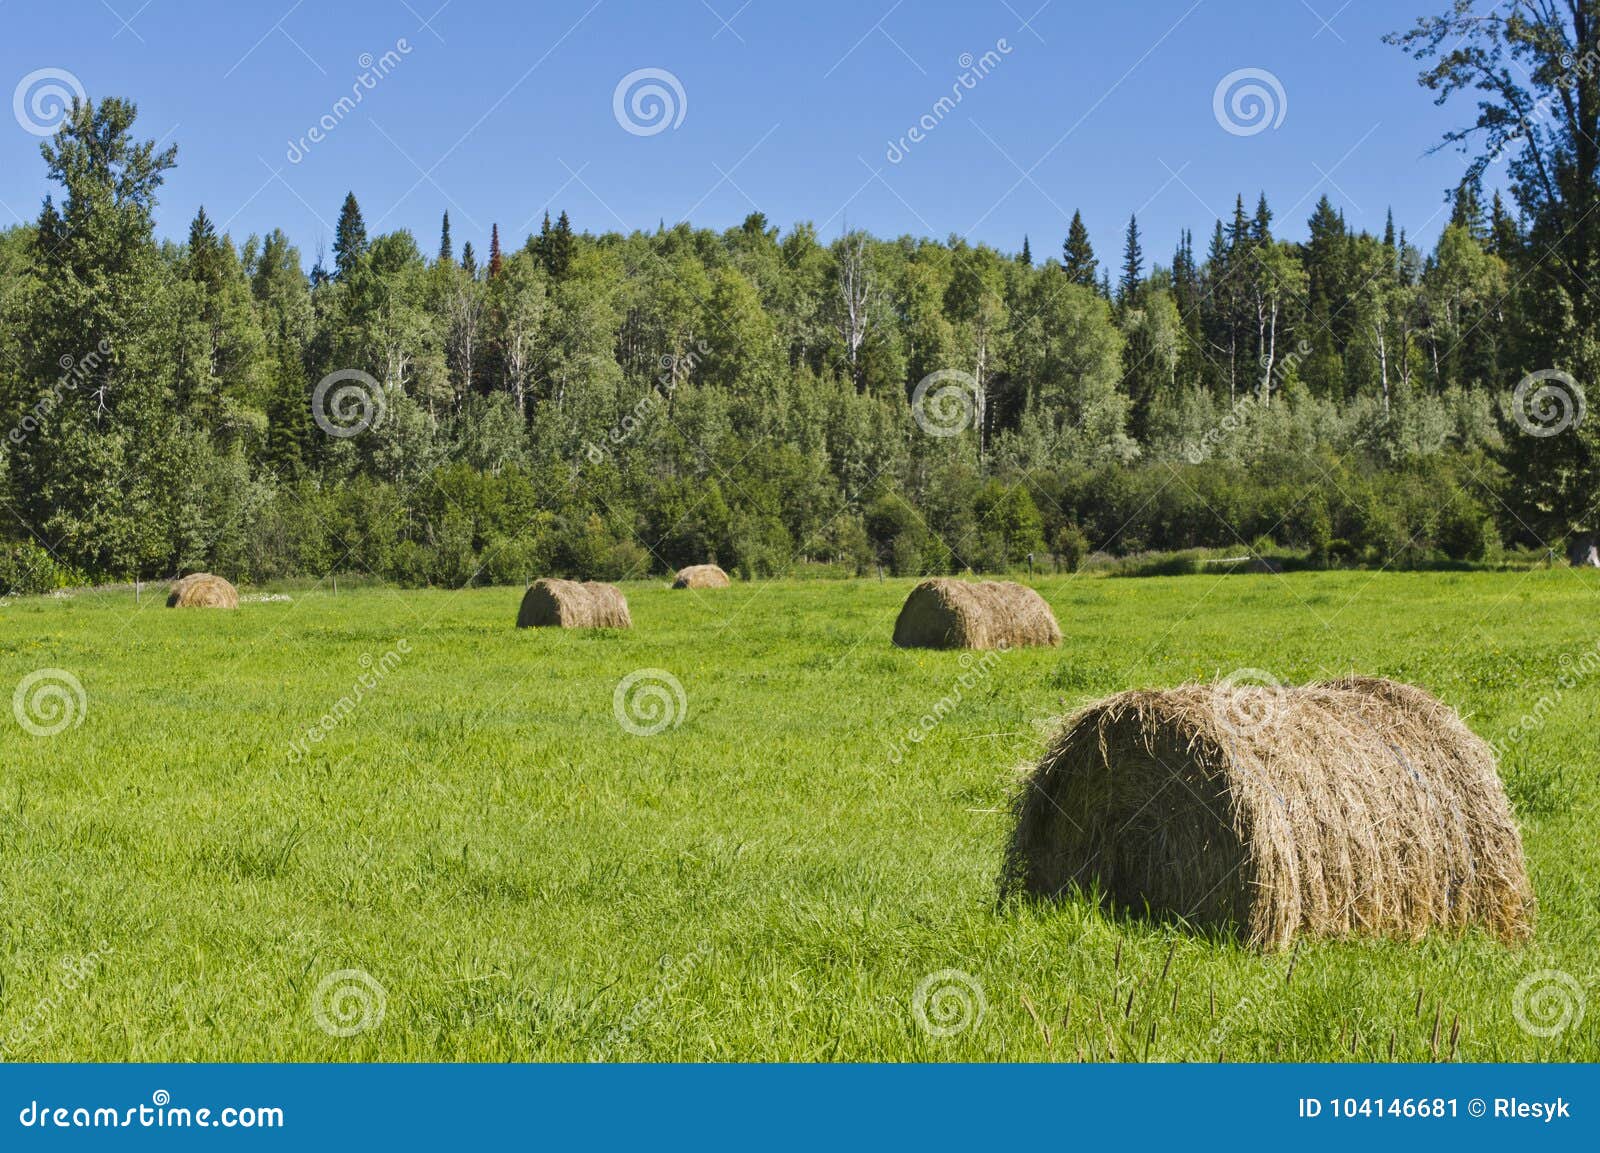 Rolled Bales Of Hay In A Field. Stock Image | CartoonDealer.com #220181479